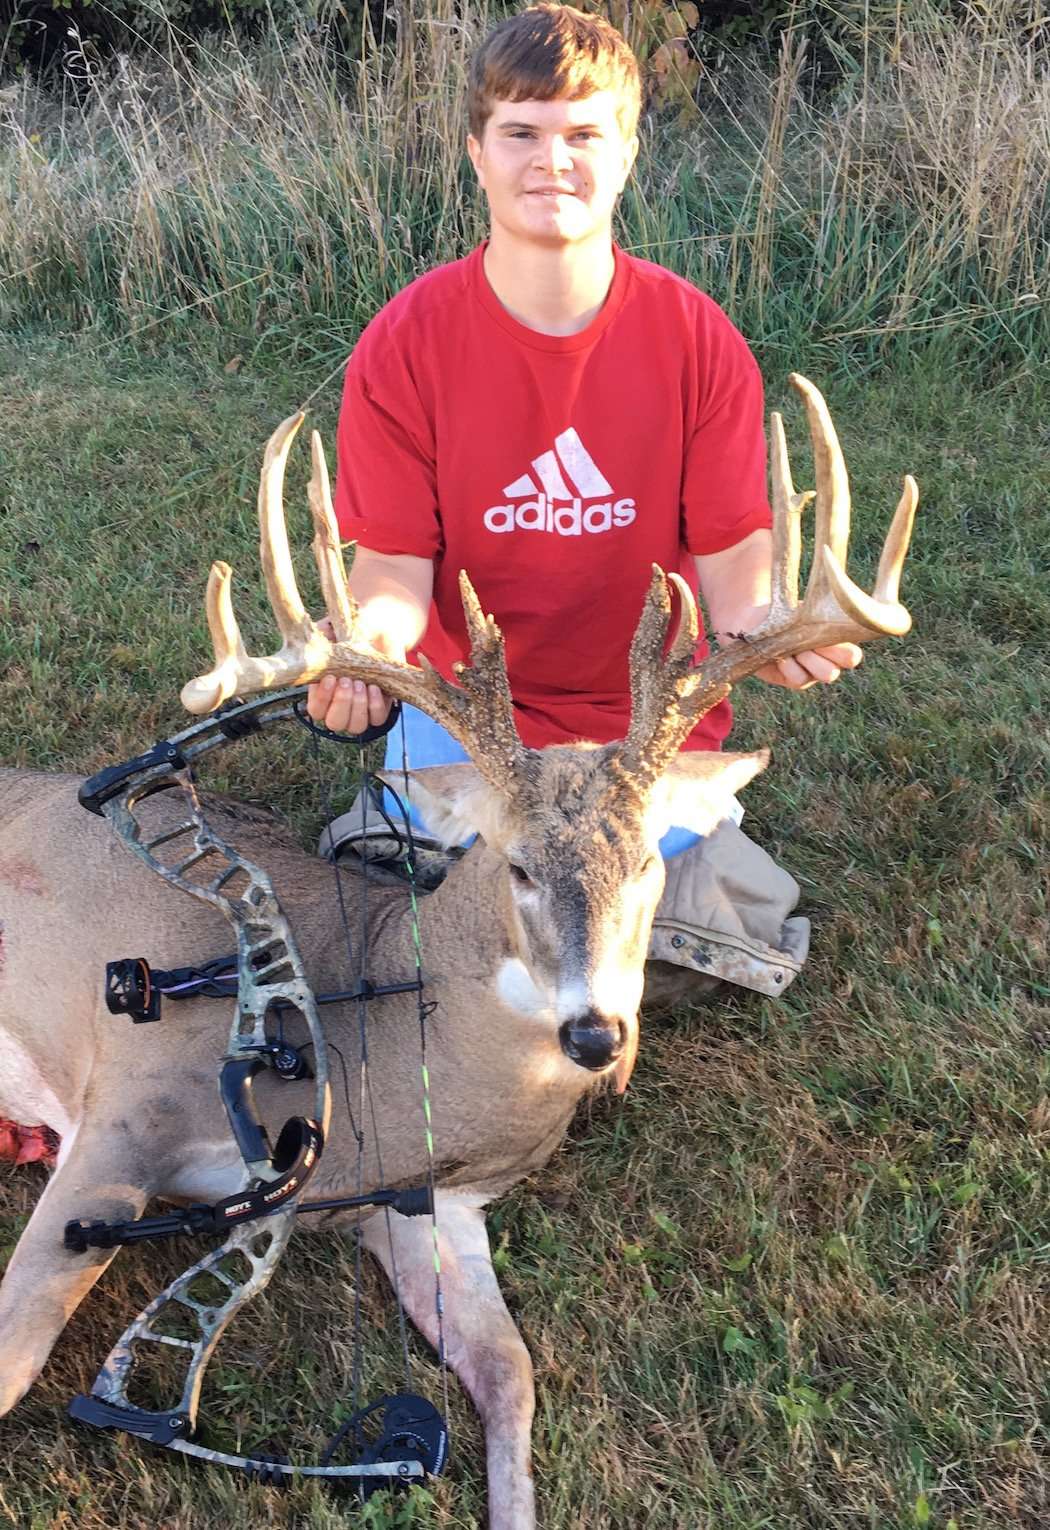 South Dakota's Cade Fortuna arrowed this outstanding 197-inch buck on Oct. 8, 2016.  (Cade Fortuna photo)